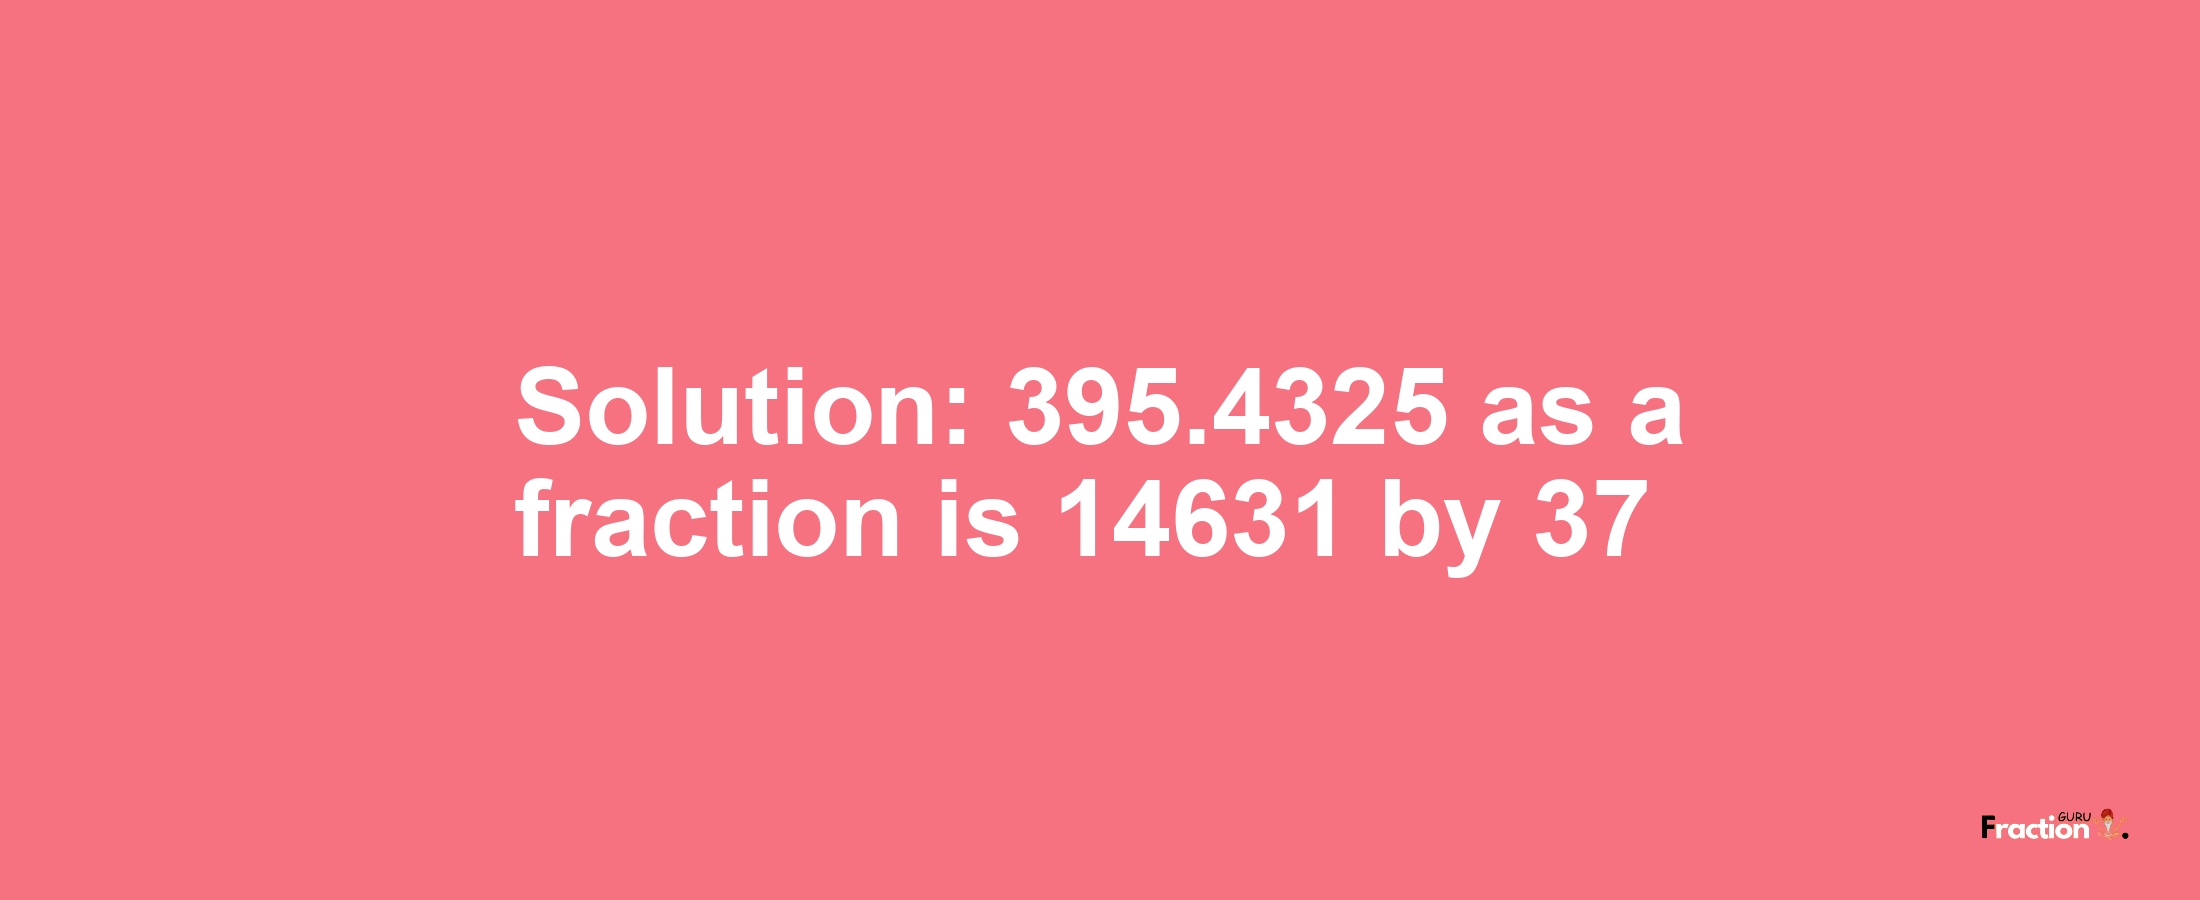 Solution:395.4325 as a fraction is 14631/37